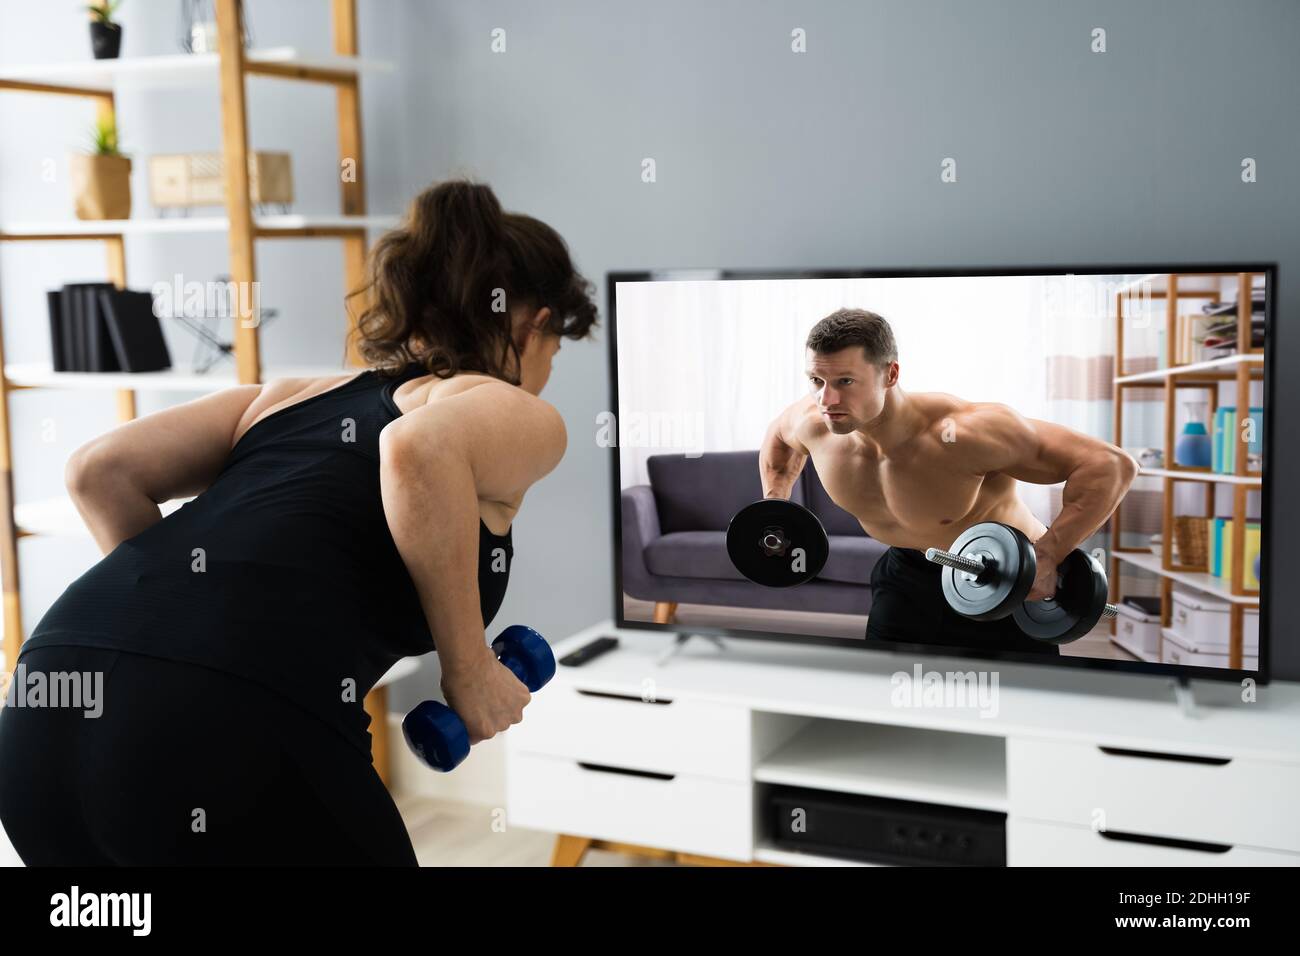 Online TV Home Fitness Workout And Exercise Stock Photo